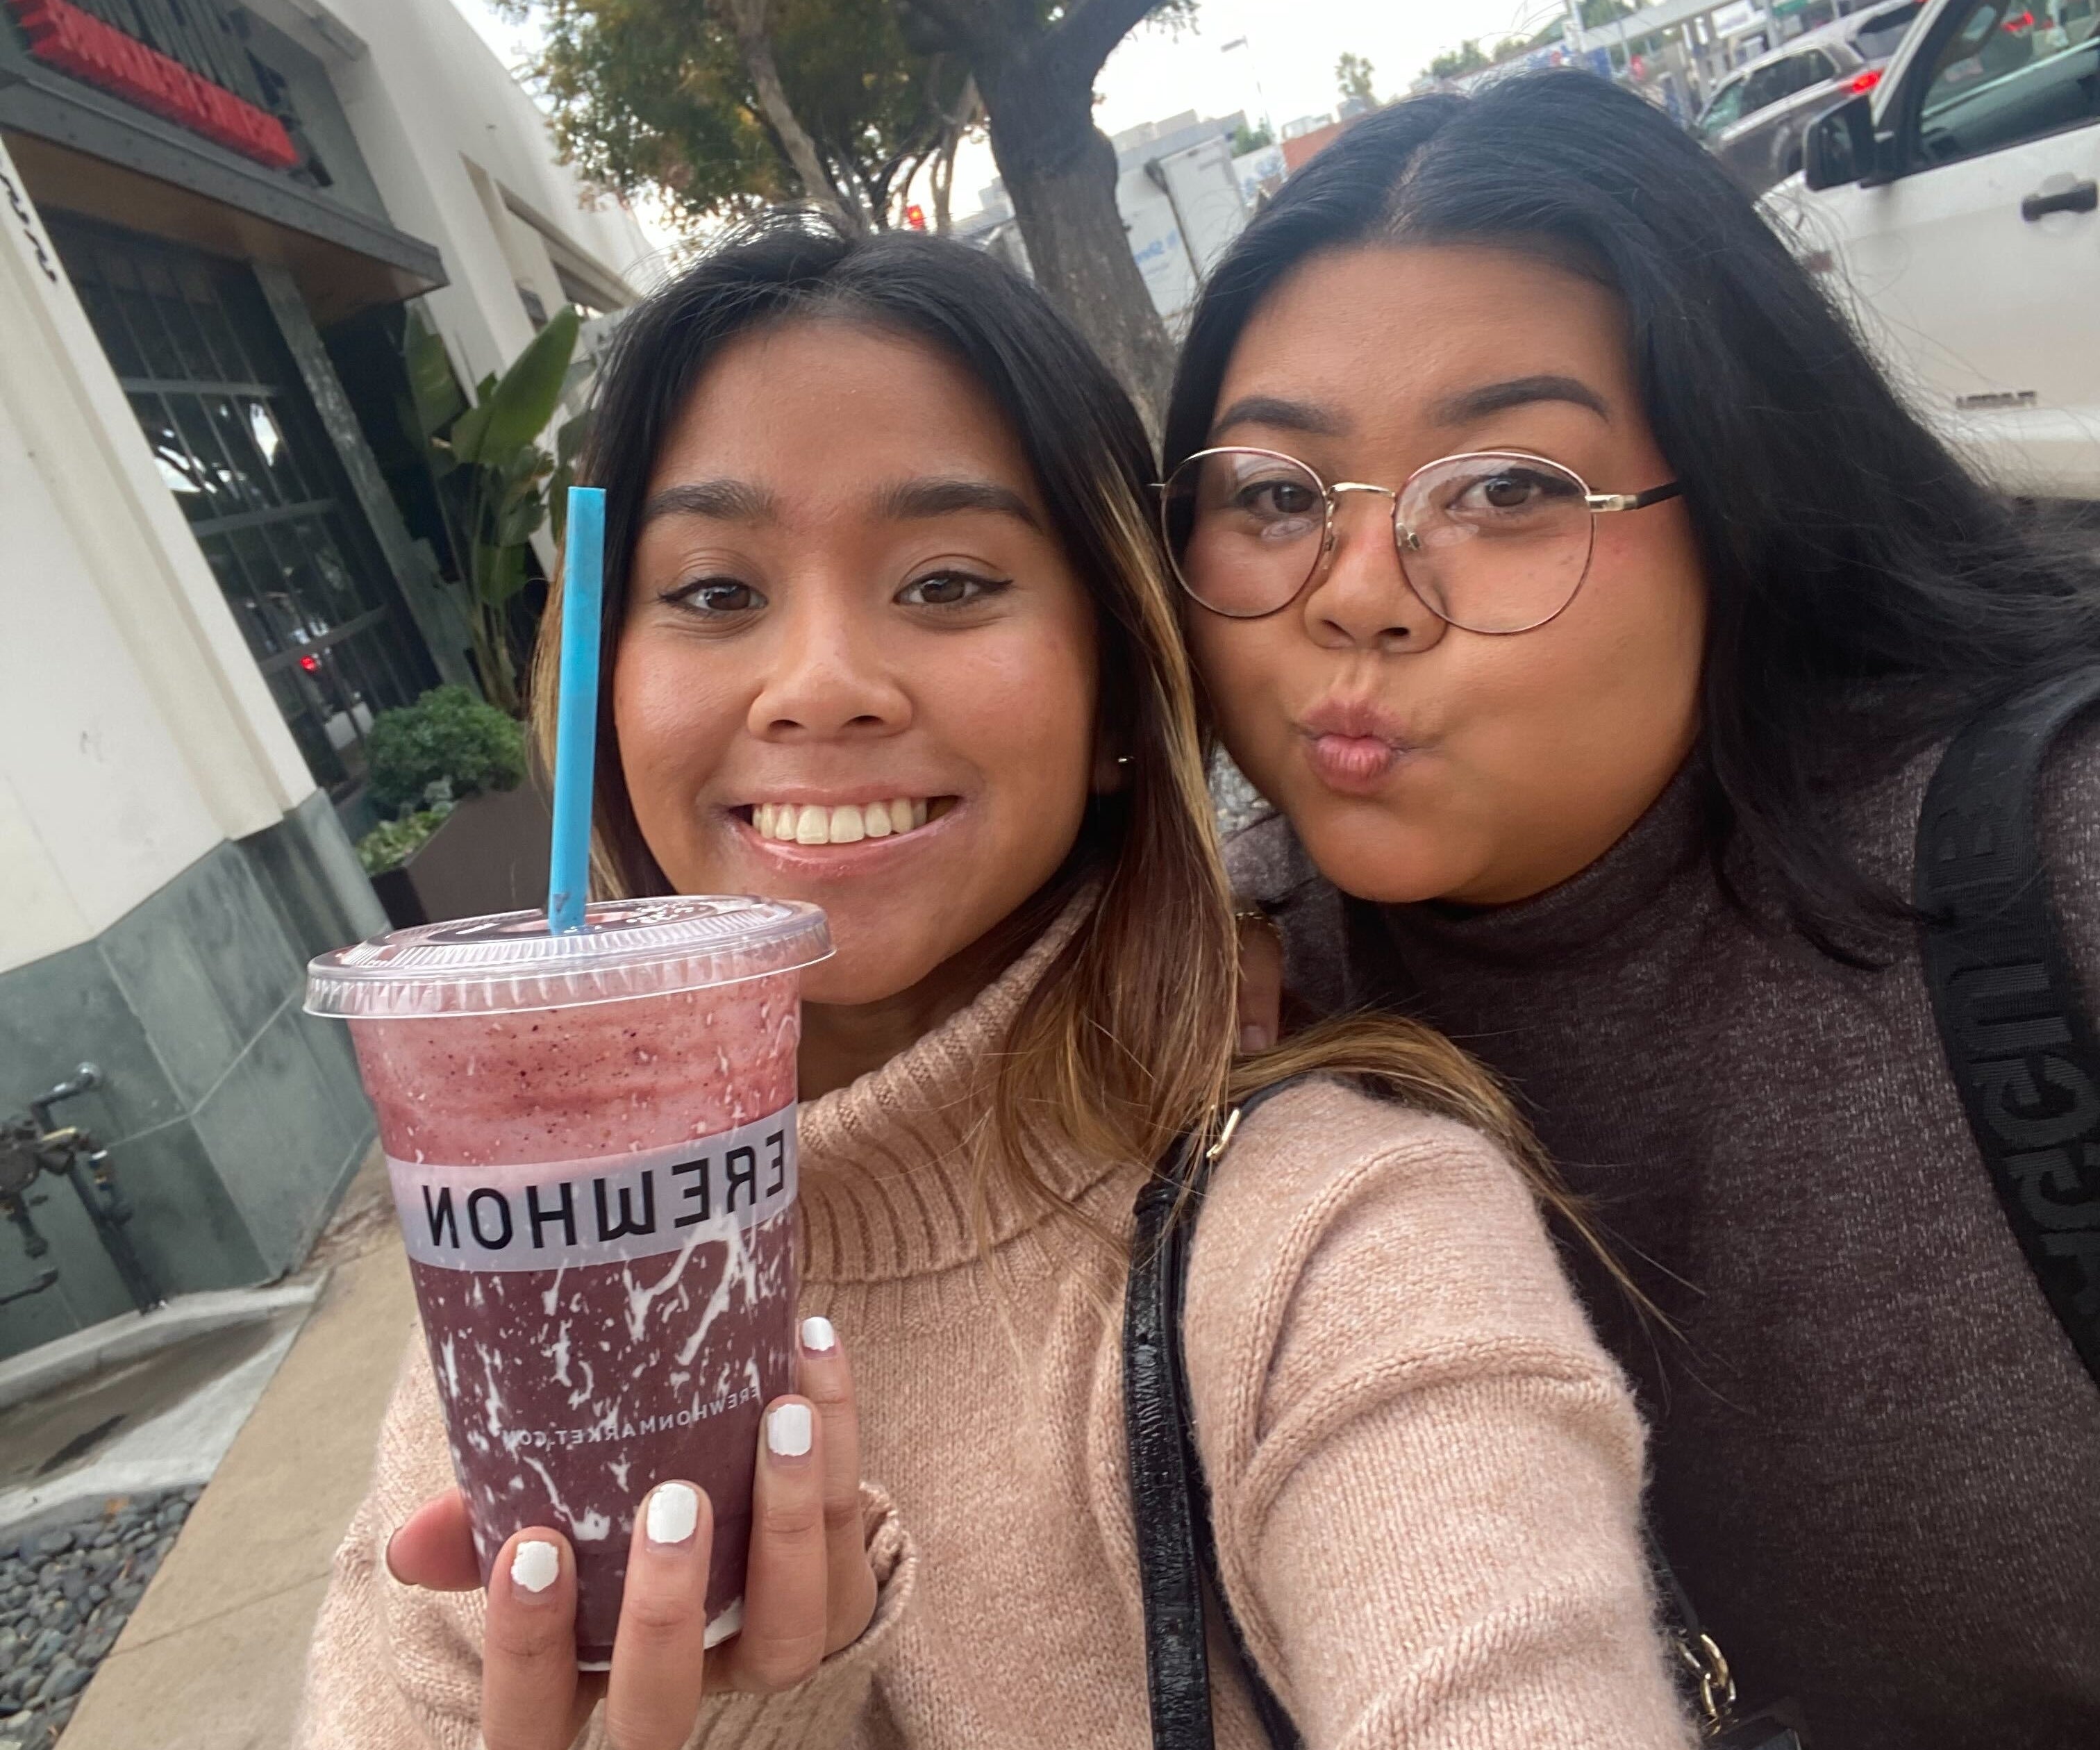 The author and her sister are posing with the Olivia Rodrigo smoothie